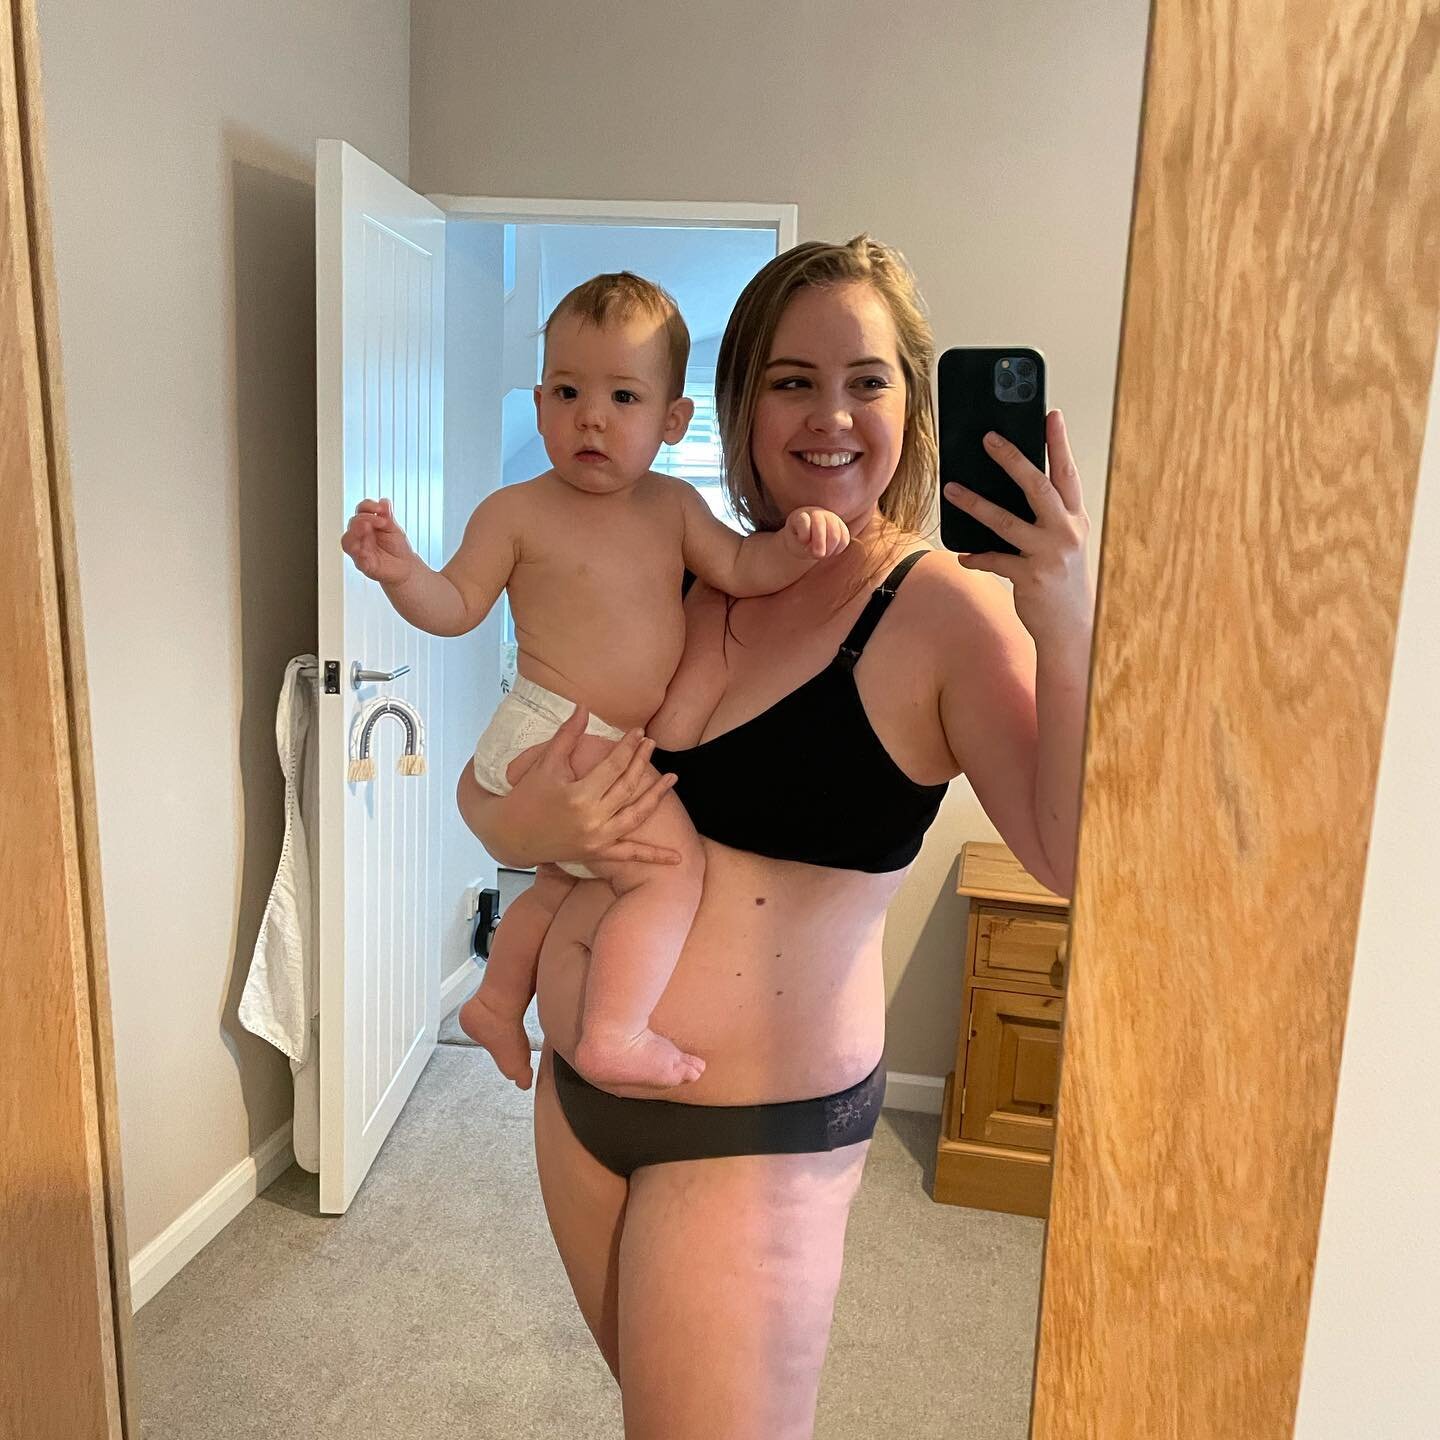 My Postpartum Body

Quite frankly I&rsquo;m not interested in bouncing BACK, my life has moved FORWARD, and with it my body has changed and achieved incredible things so why would I want to go BACK? 

BACK would be to a time I didn&rsquo;t truly trus